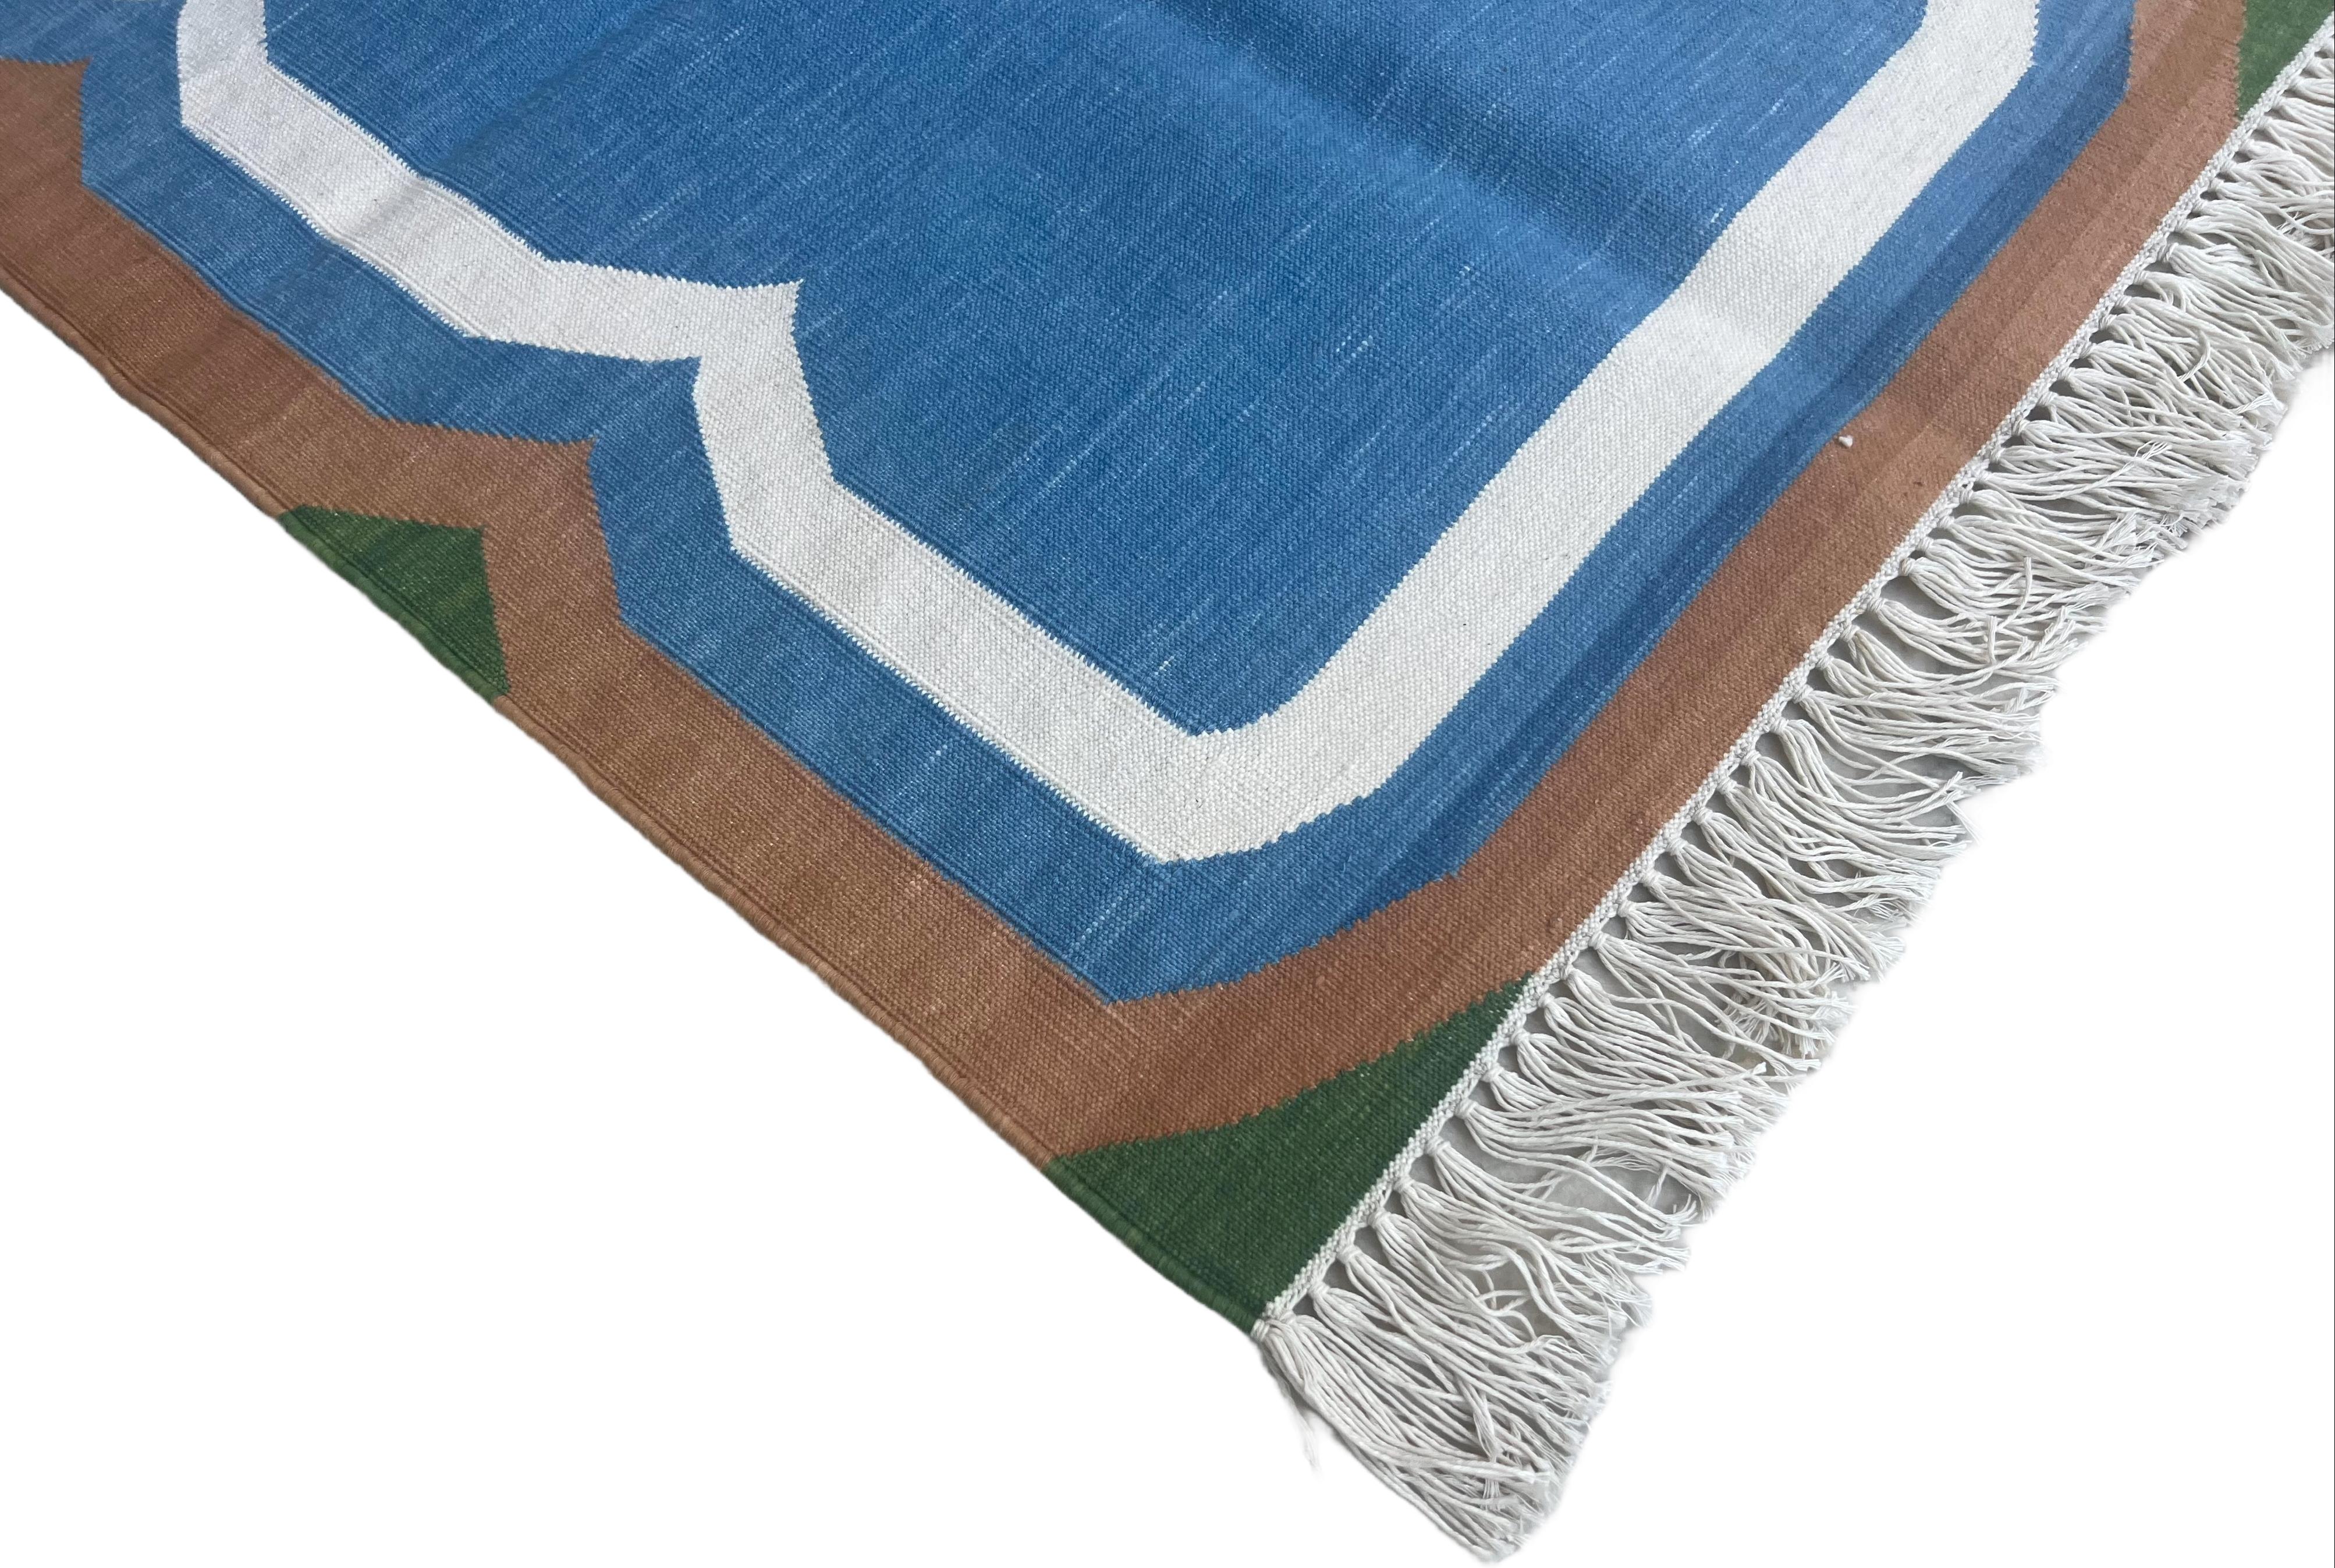 Cotton Vegetable Dyed  Blue, Cream And Tan Scalloped Striped Indian Dhurrie Rug - 2'x3' (60x90cm) 

These special flat-weave dhurries are hand-woven with 15 ply 100% cotton yarn. Due to the special manufacturing techniques used to create our rugs,